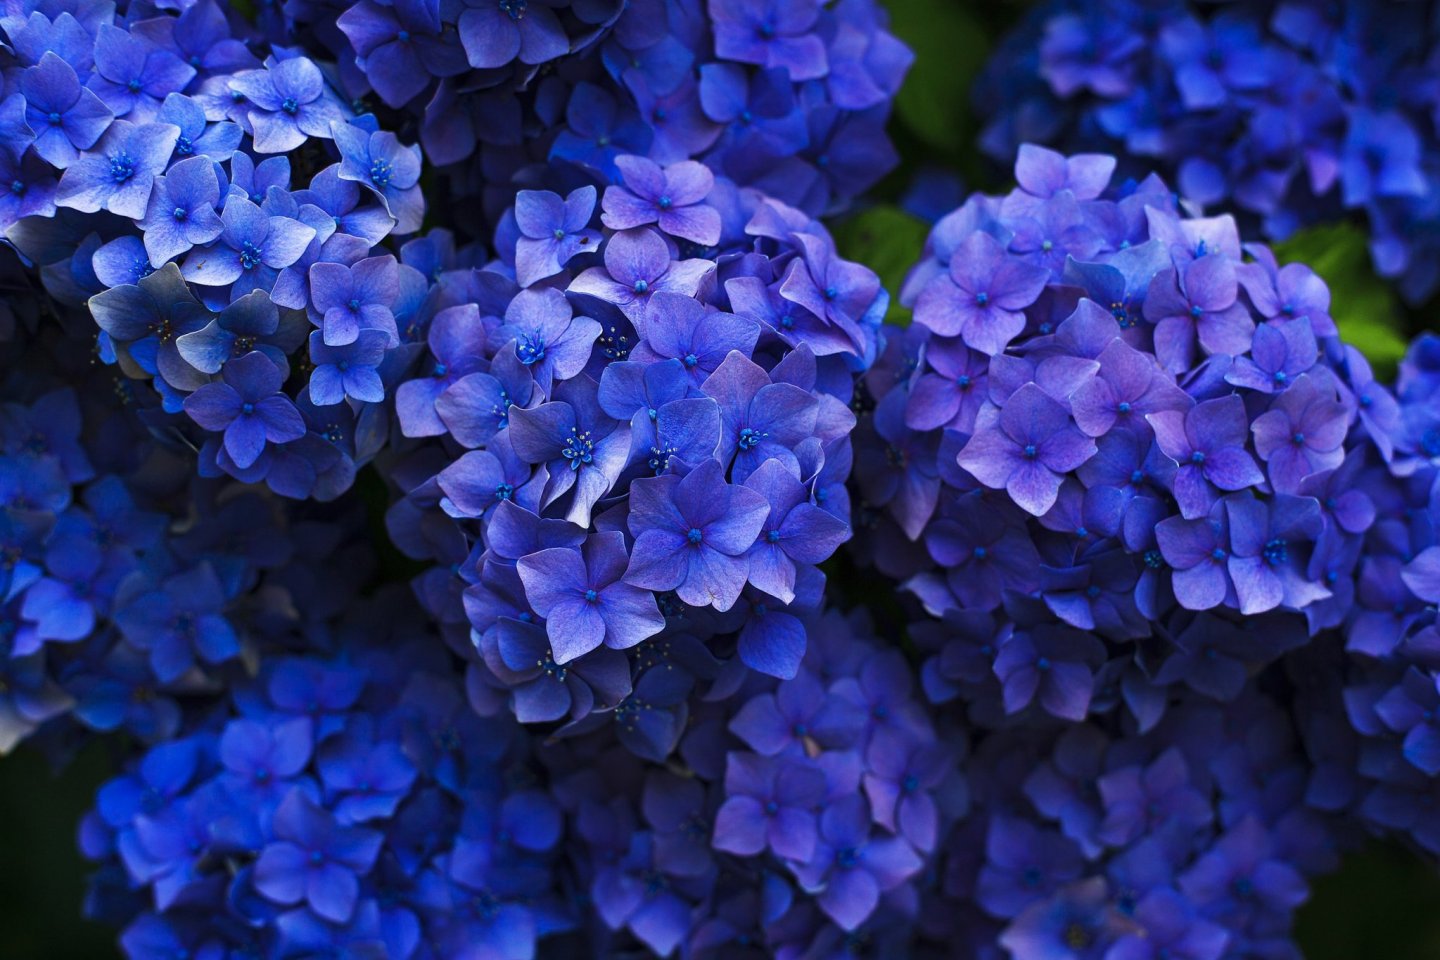 Flower Park Kagoshima will be celebrating all things blue